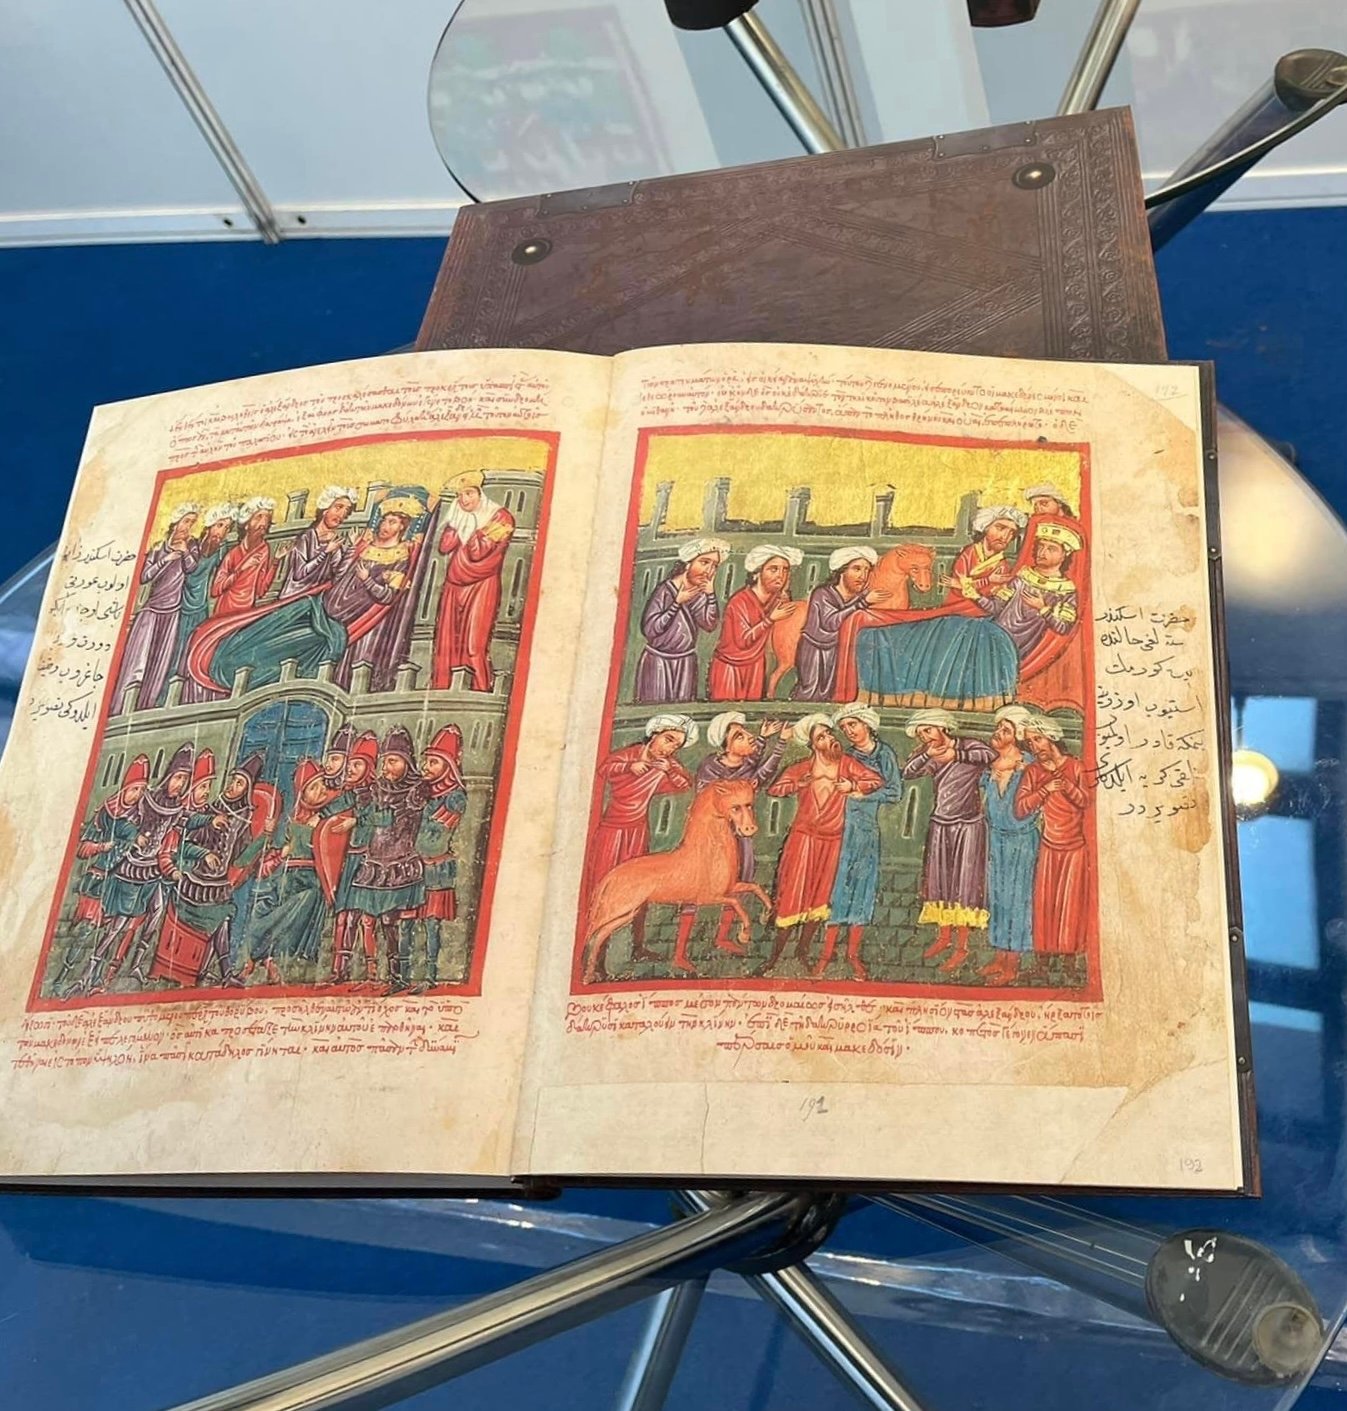 Byzantine Manuscripts displayed in India. Image Credits: Hellenic Institute of Byzantine and Post Byzantine Studies Venice.